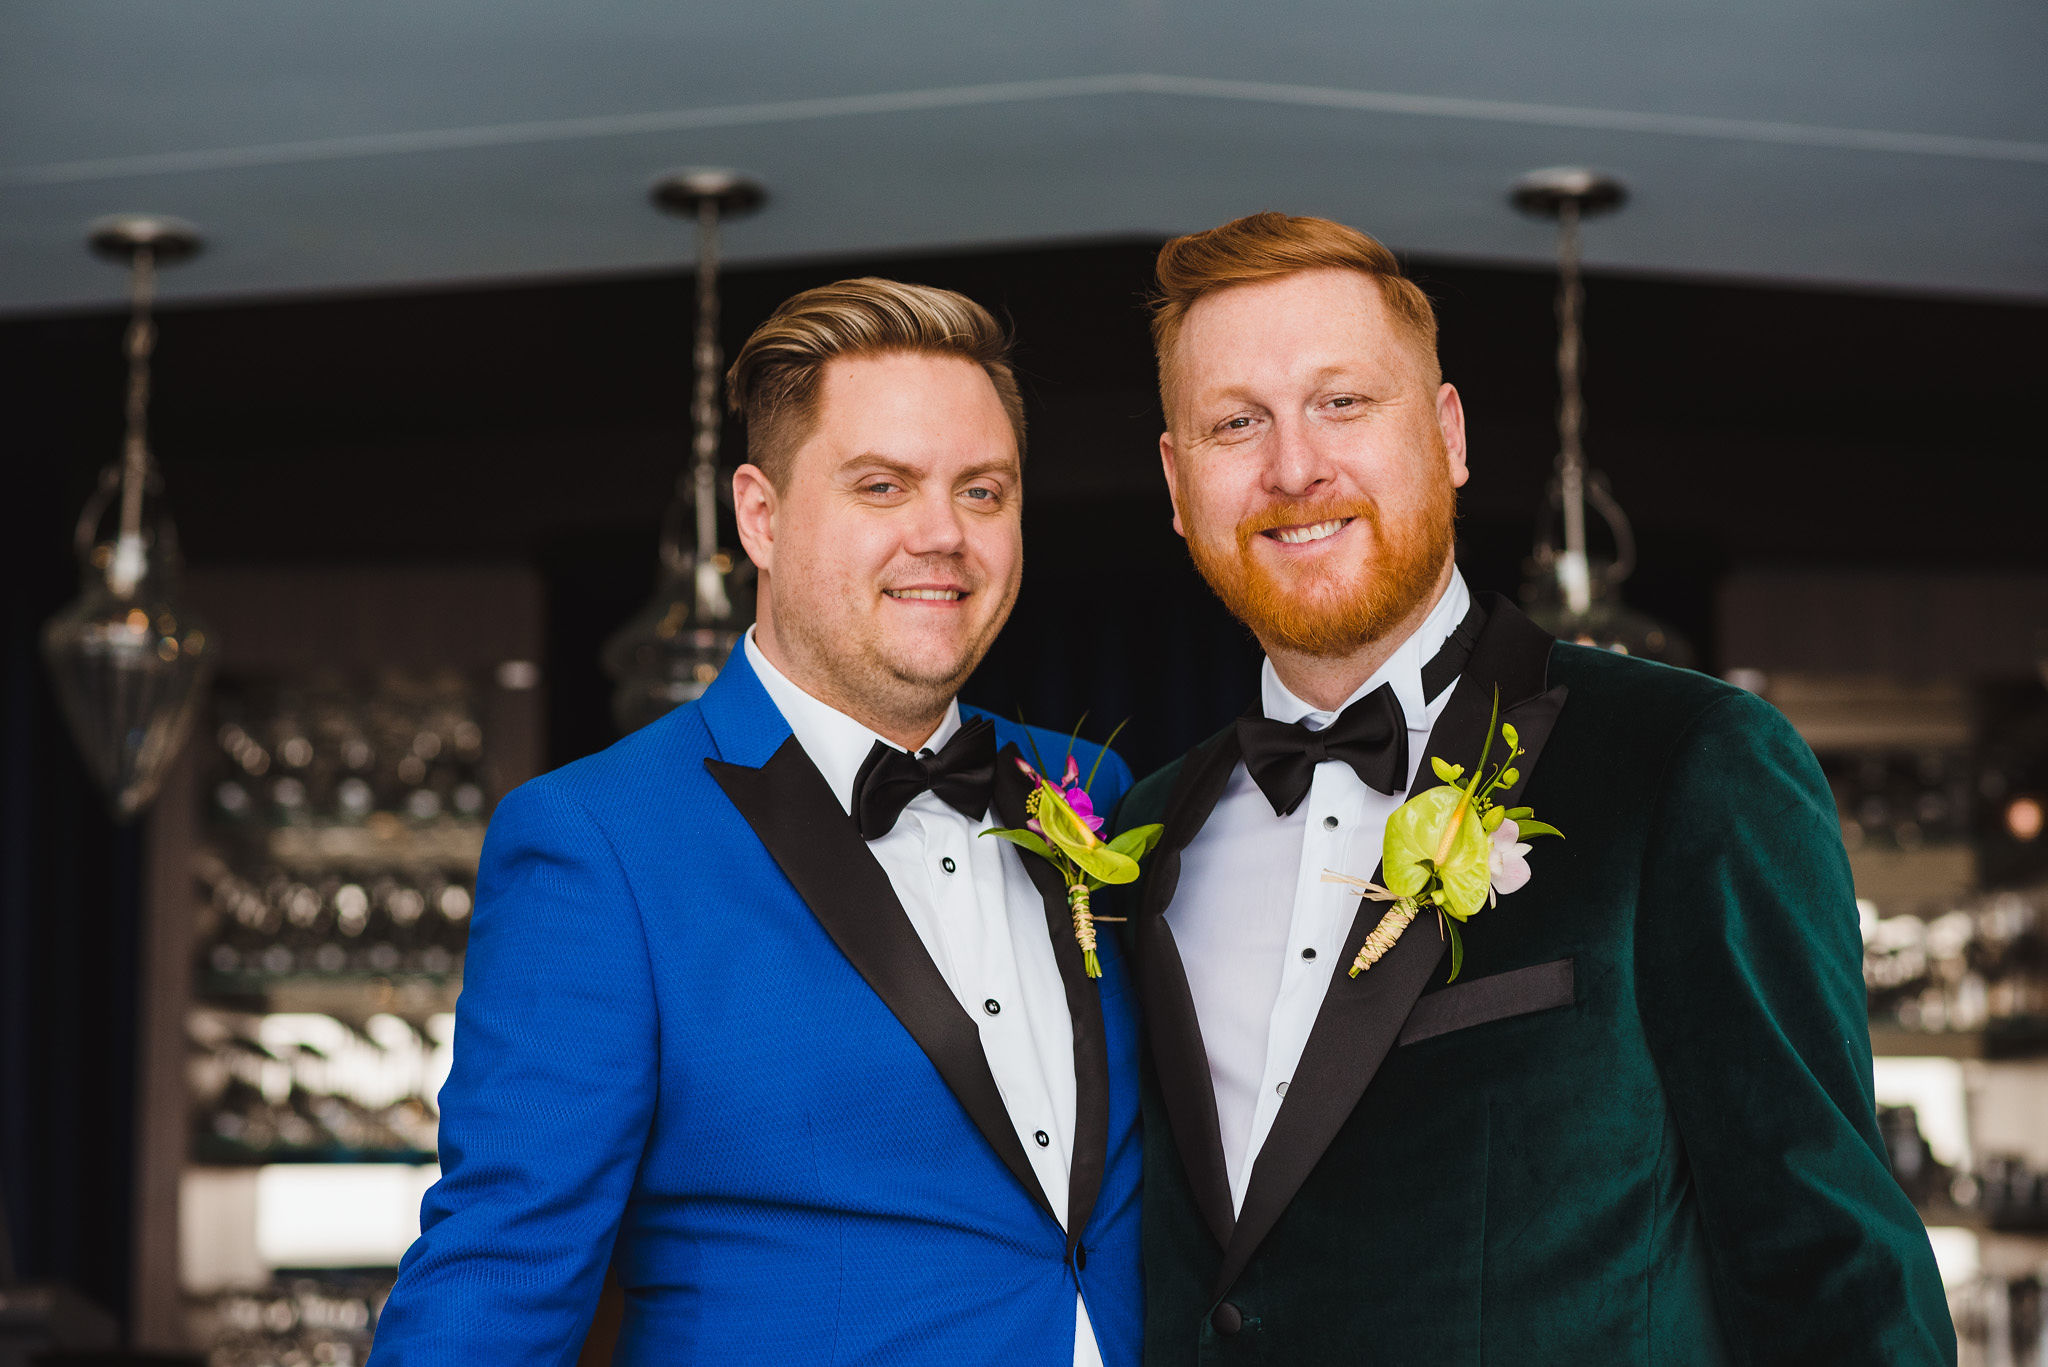 Grooms smiling and standing side by side before their wedding at the Hilton hotel in Niagara Falls